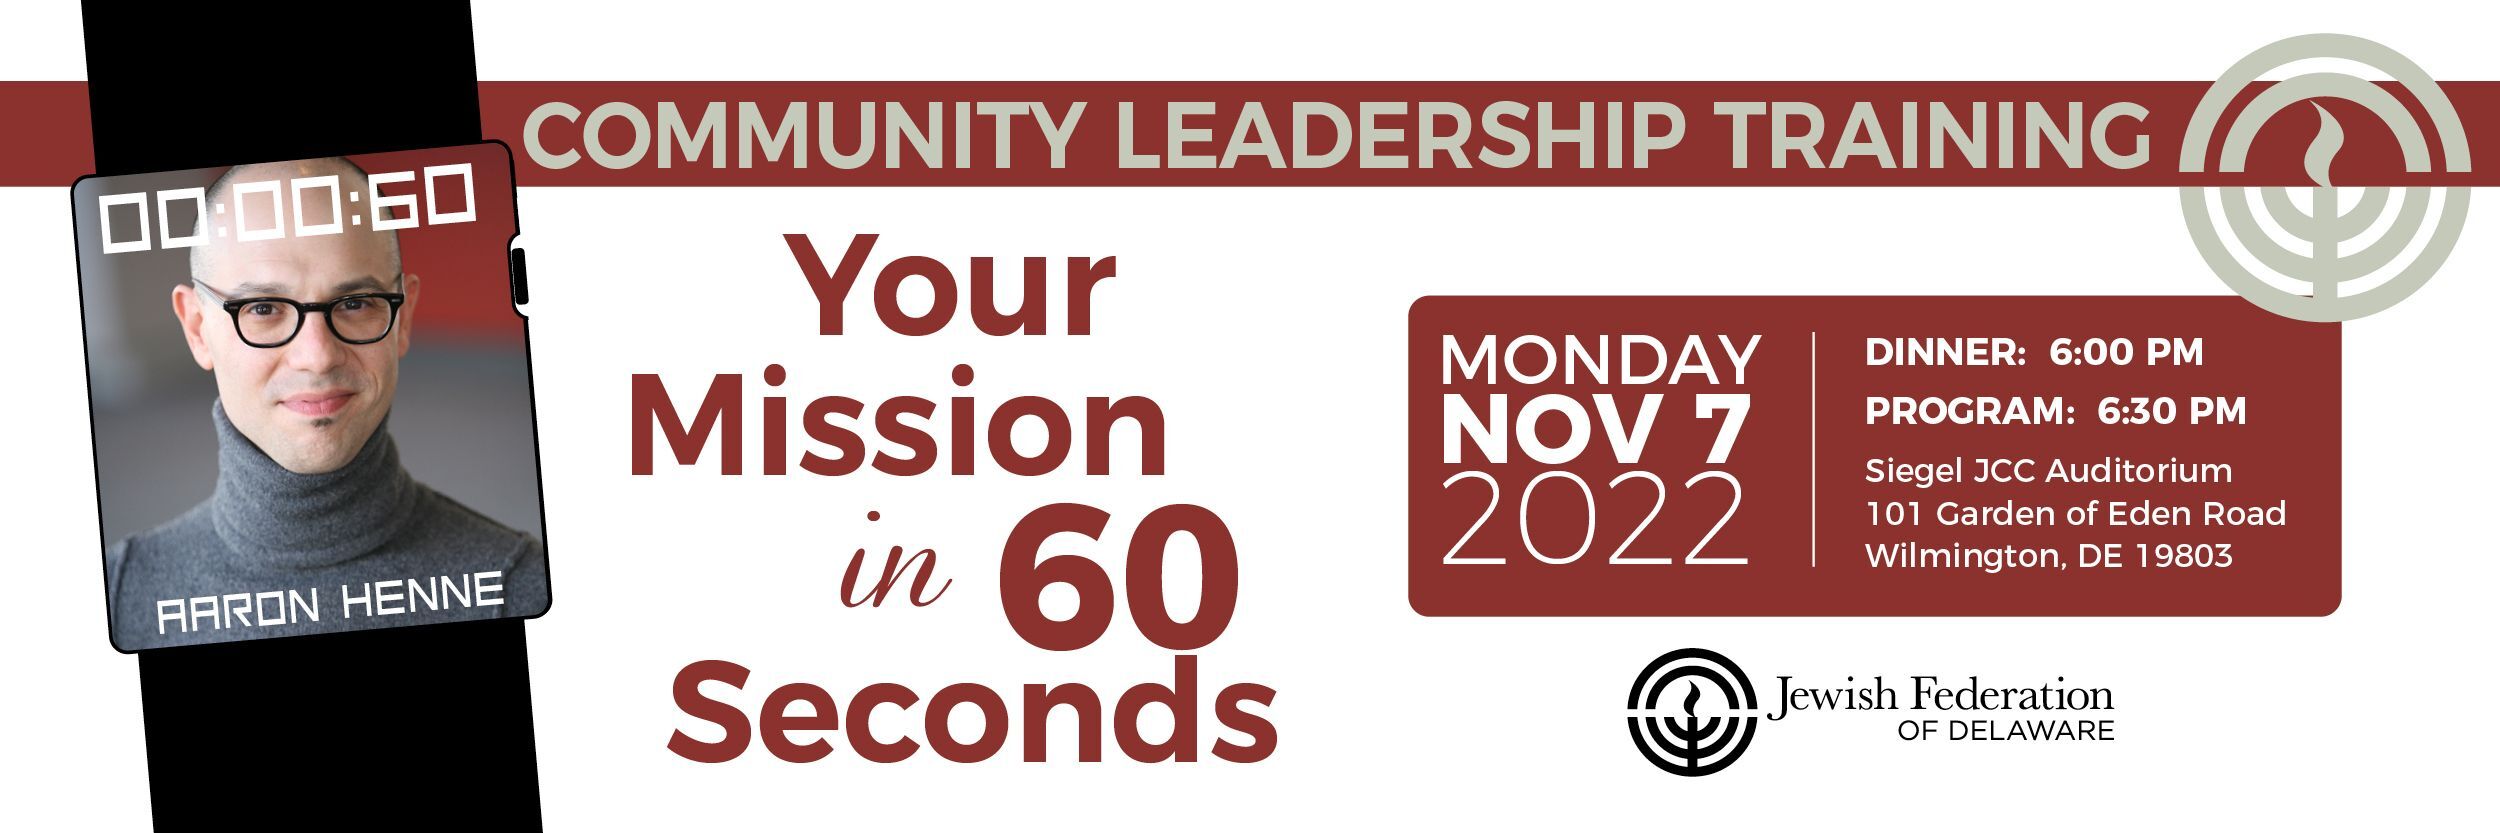 Aaron Henne - Your mission in 60 seconds Workshop 